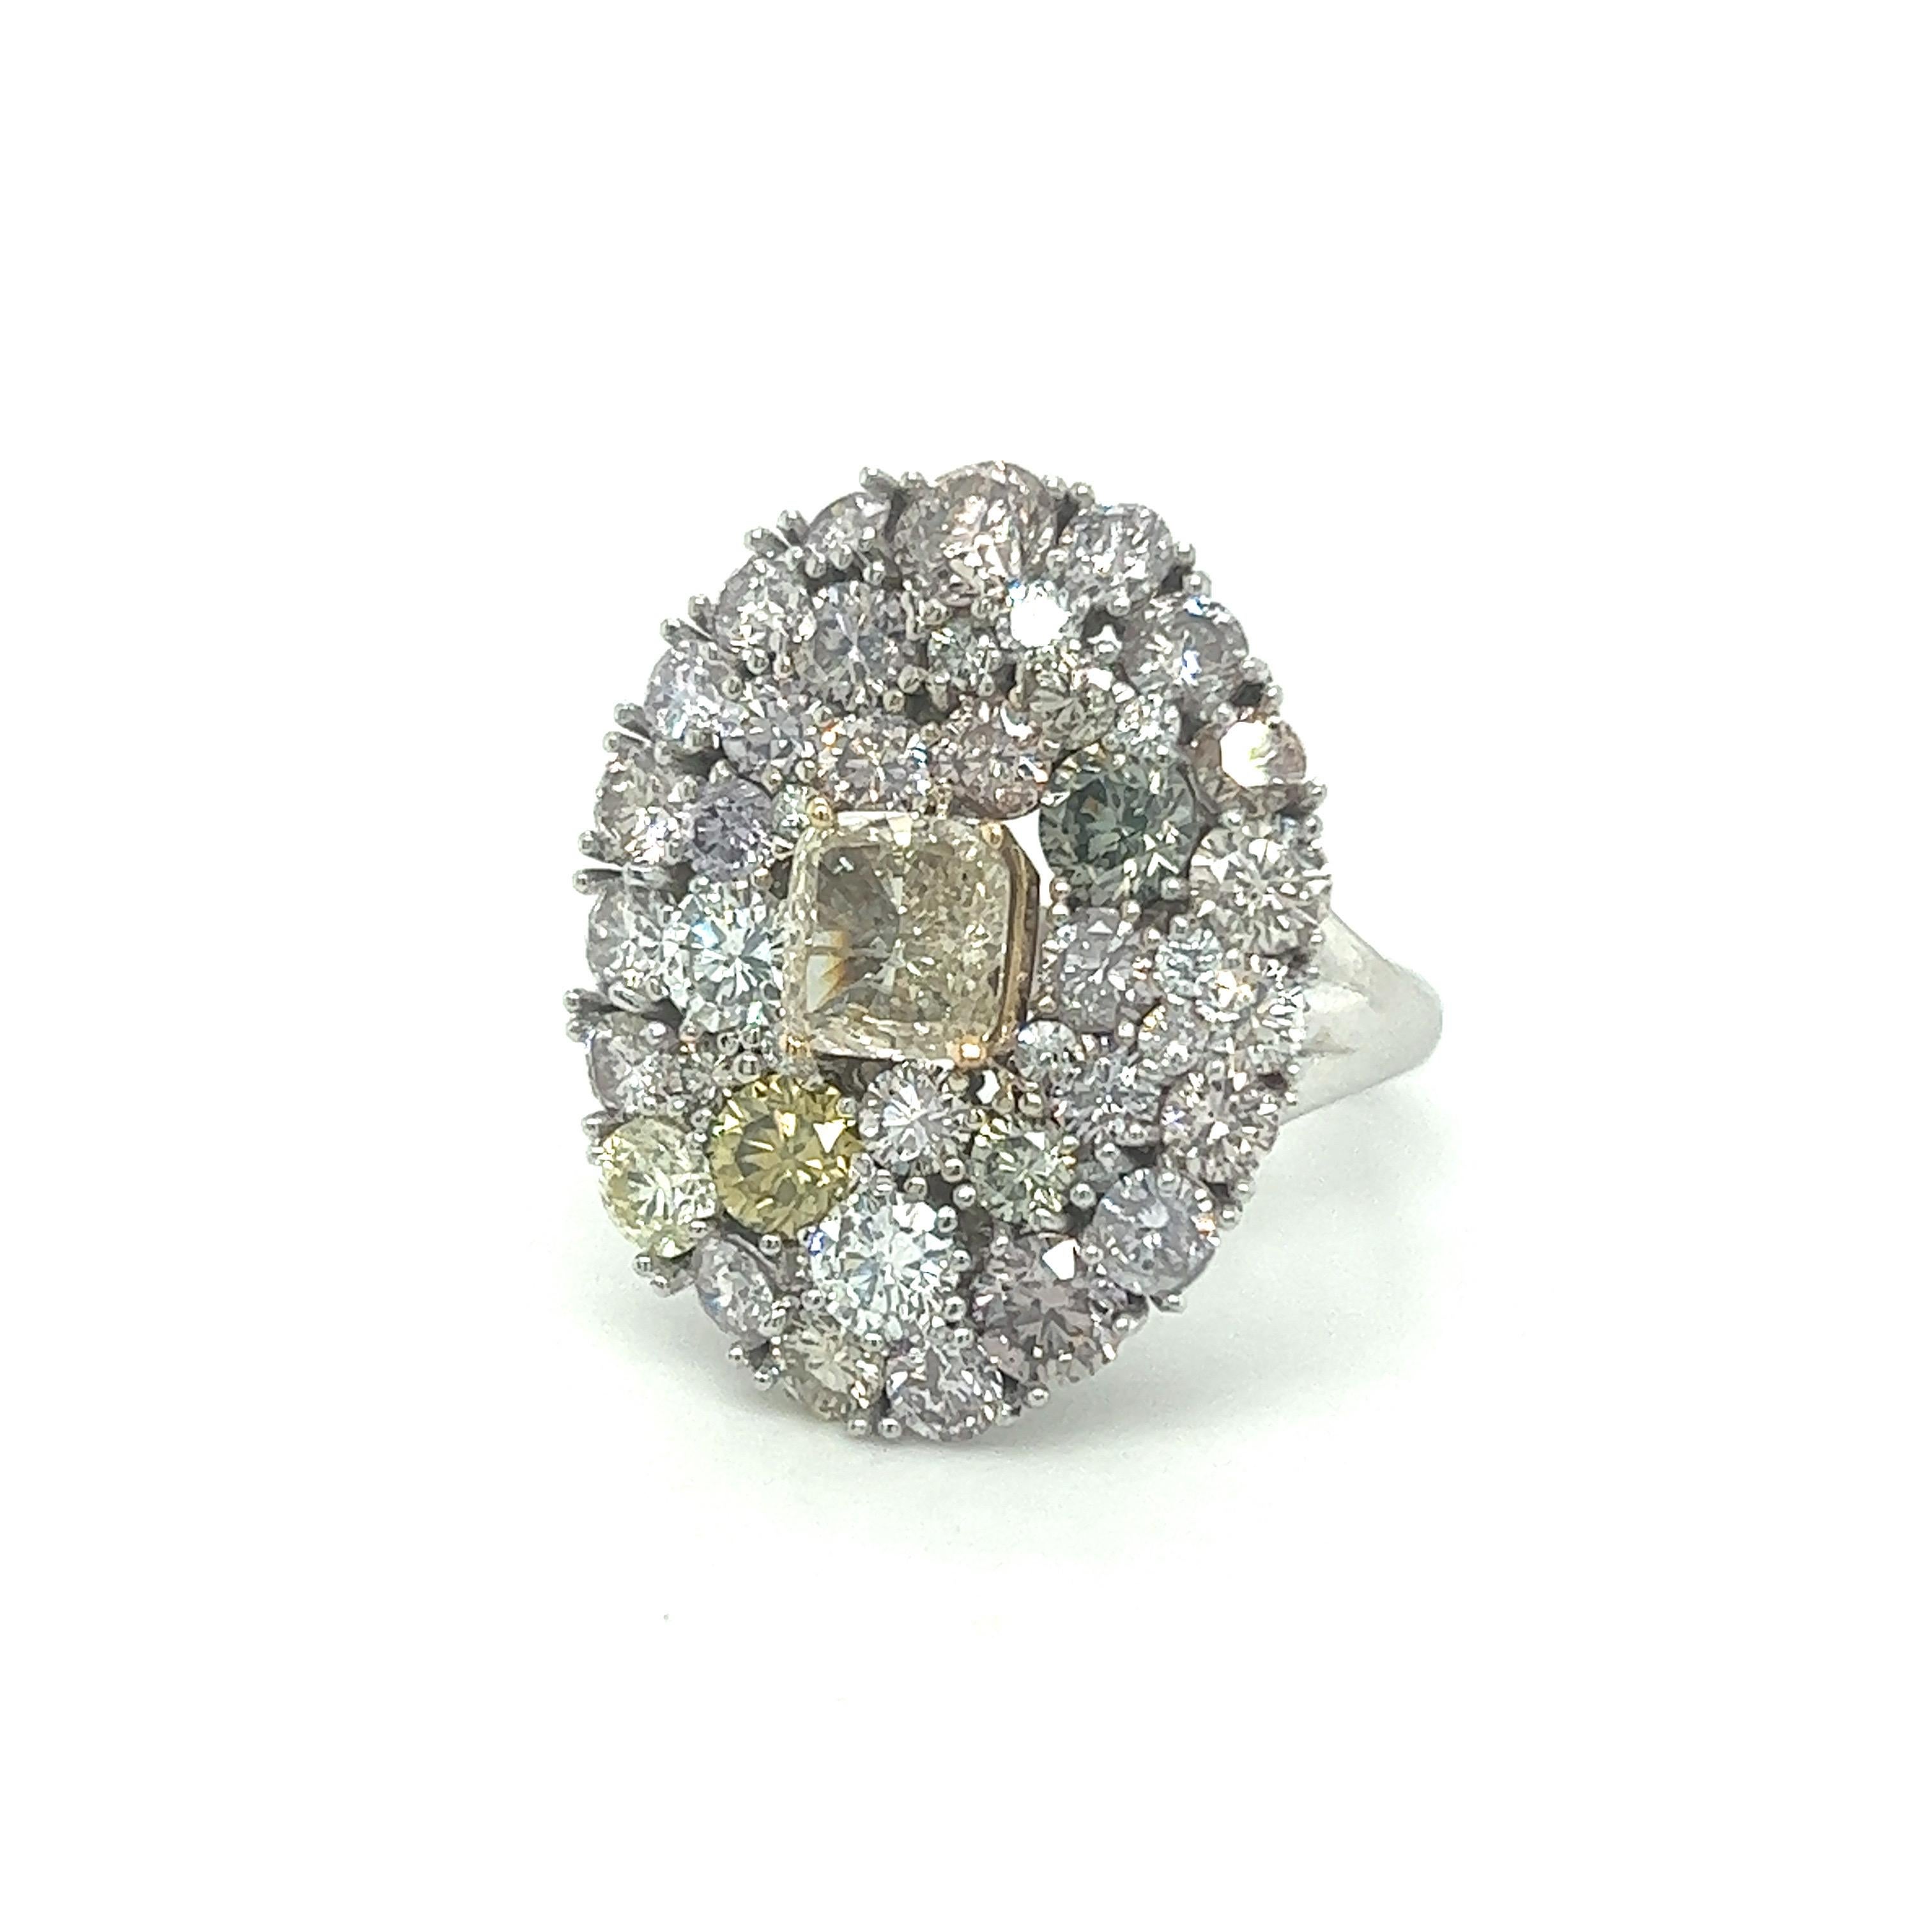 Natural Multi Colored 5 Carat Round and Princess Cut Diamond Ring For Sale 7